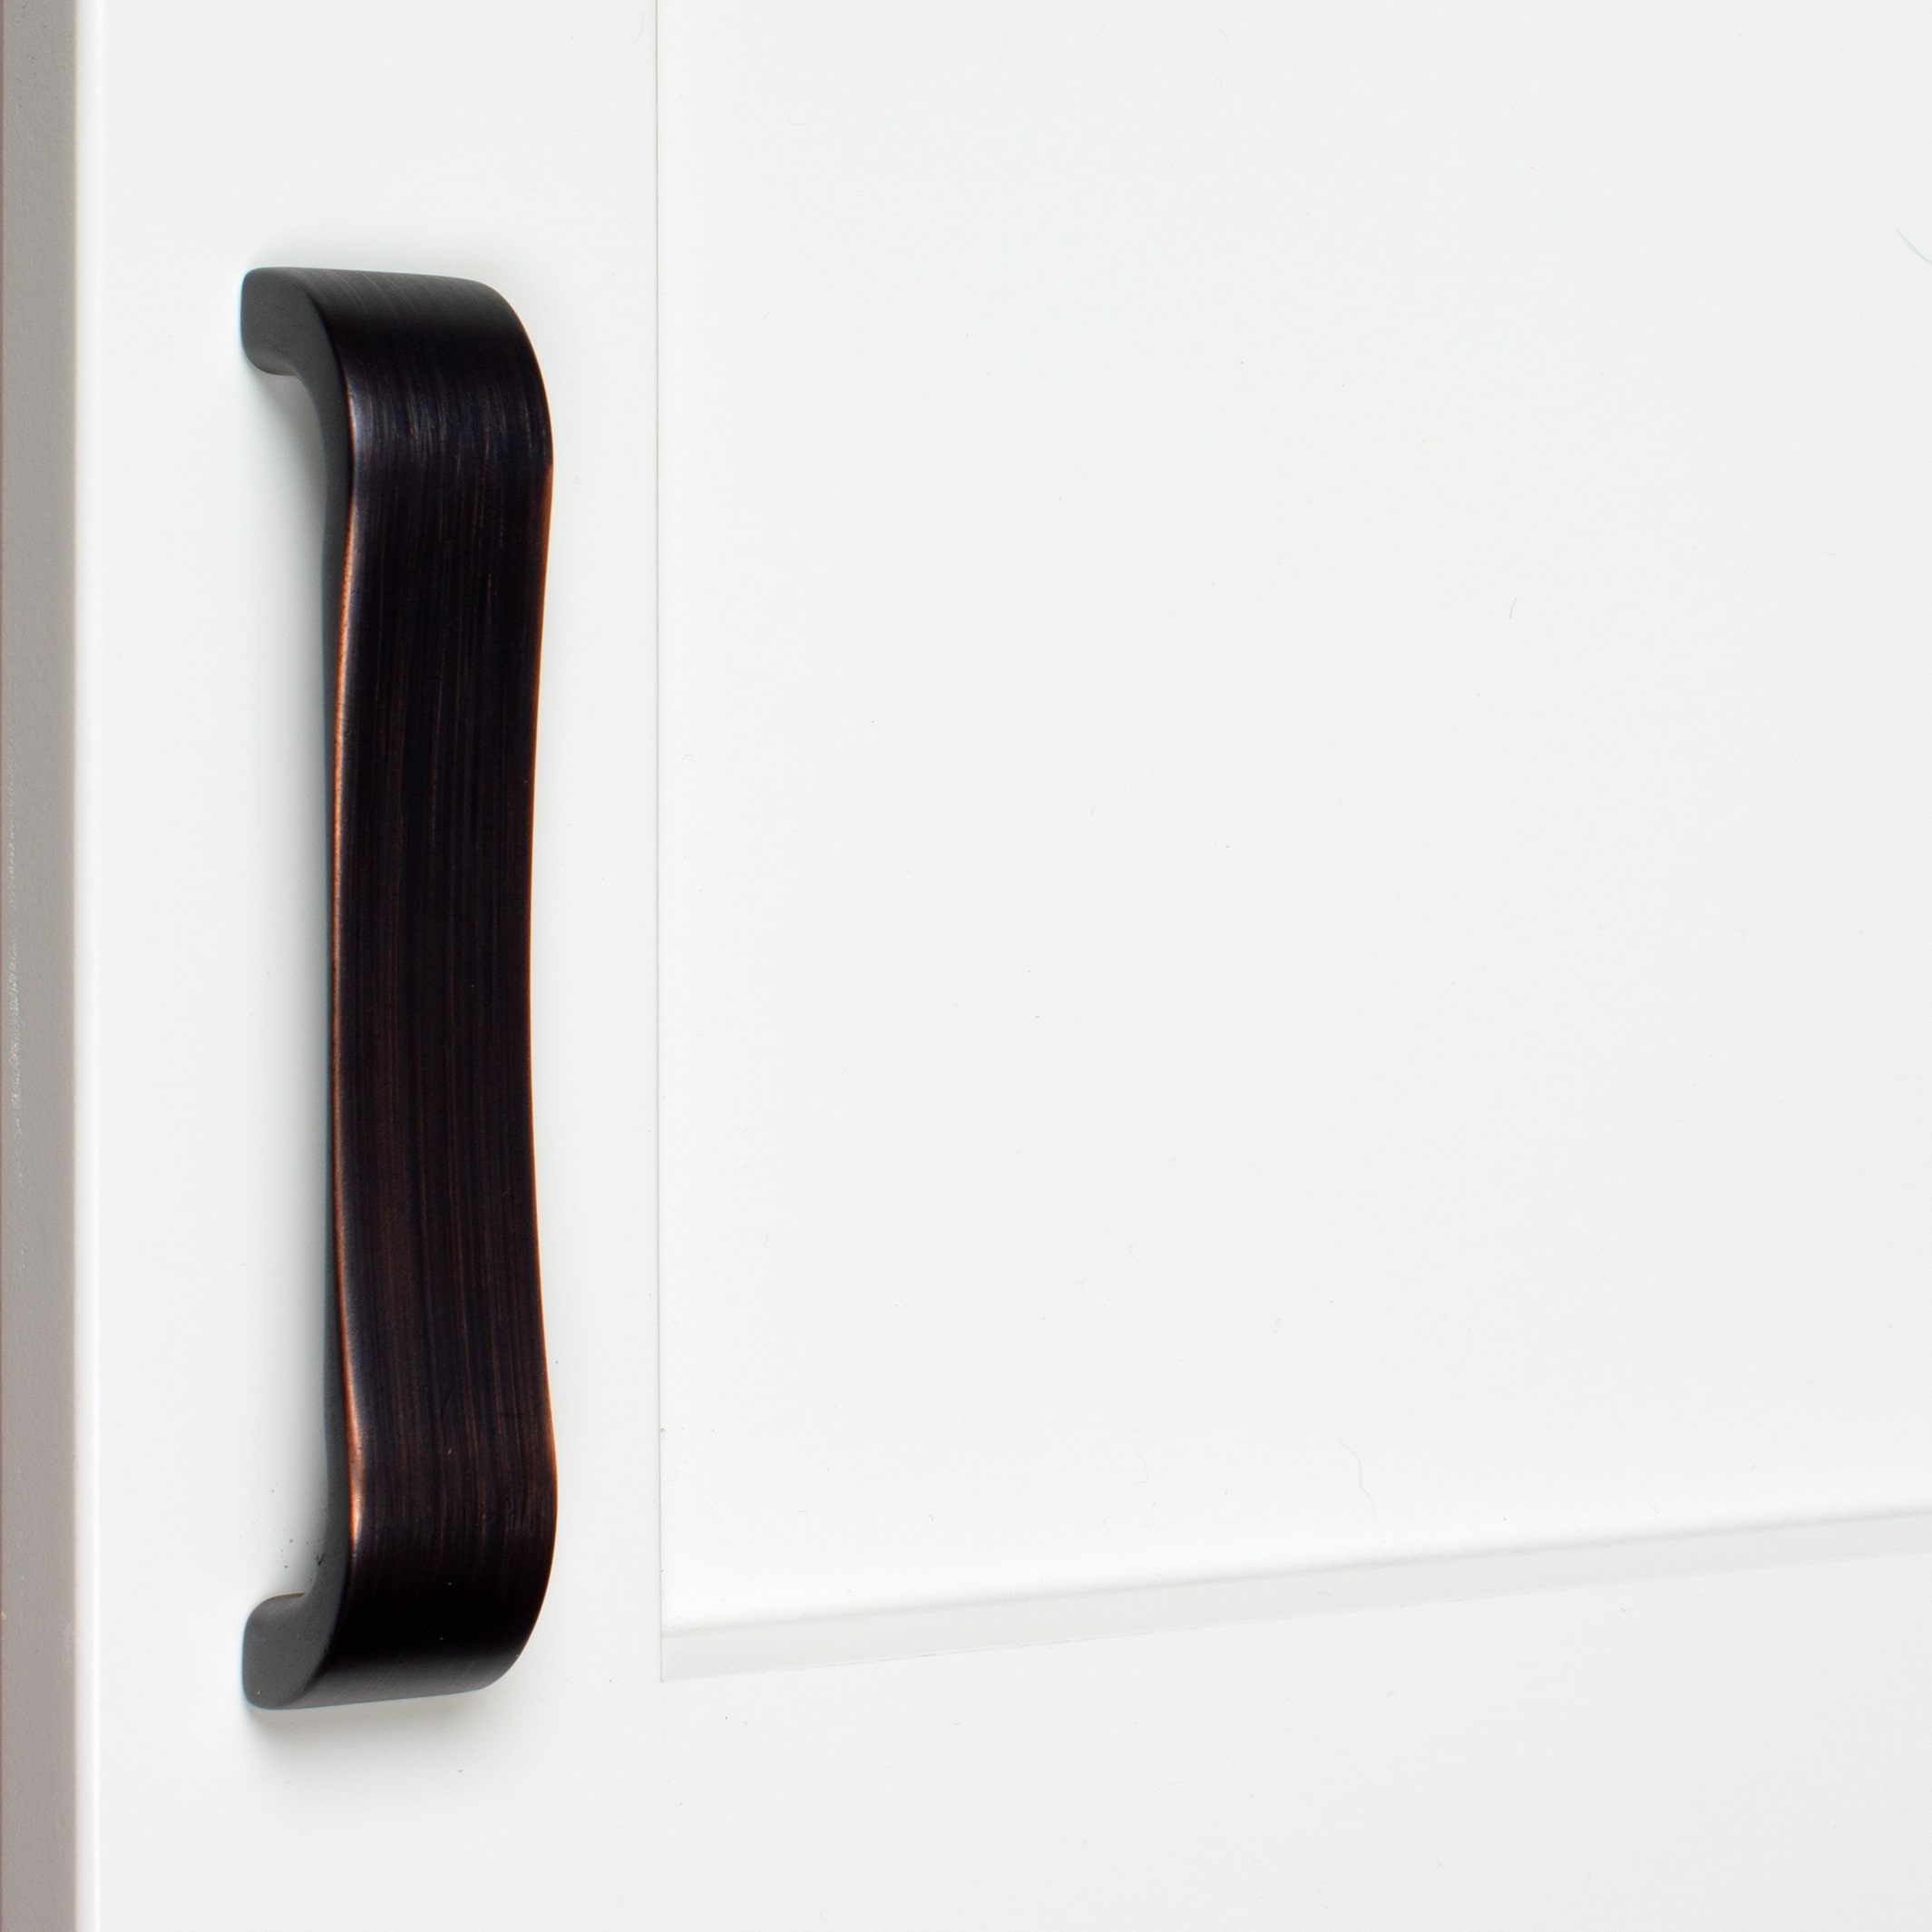 4-1/2 in. Center Smooth Curved Flat Cabinet Pull Handles, Oil Rubbed Bronze, Pack of 5 - image 3 of 3